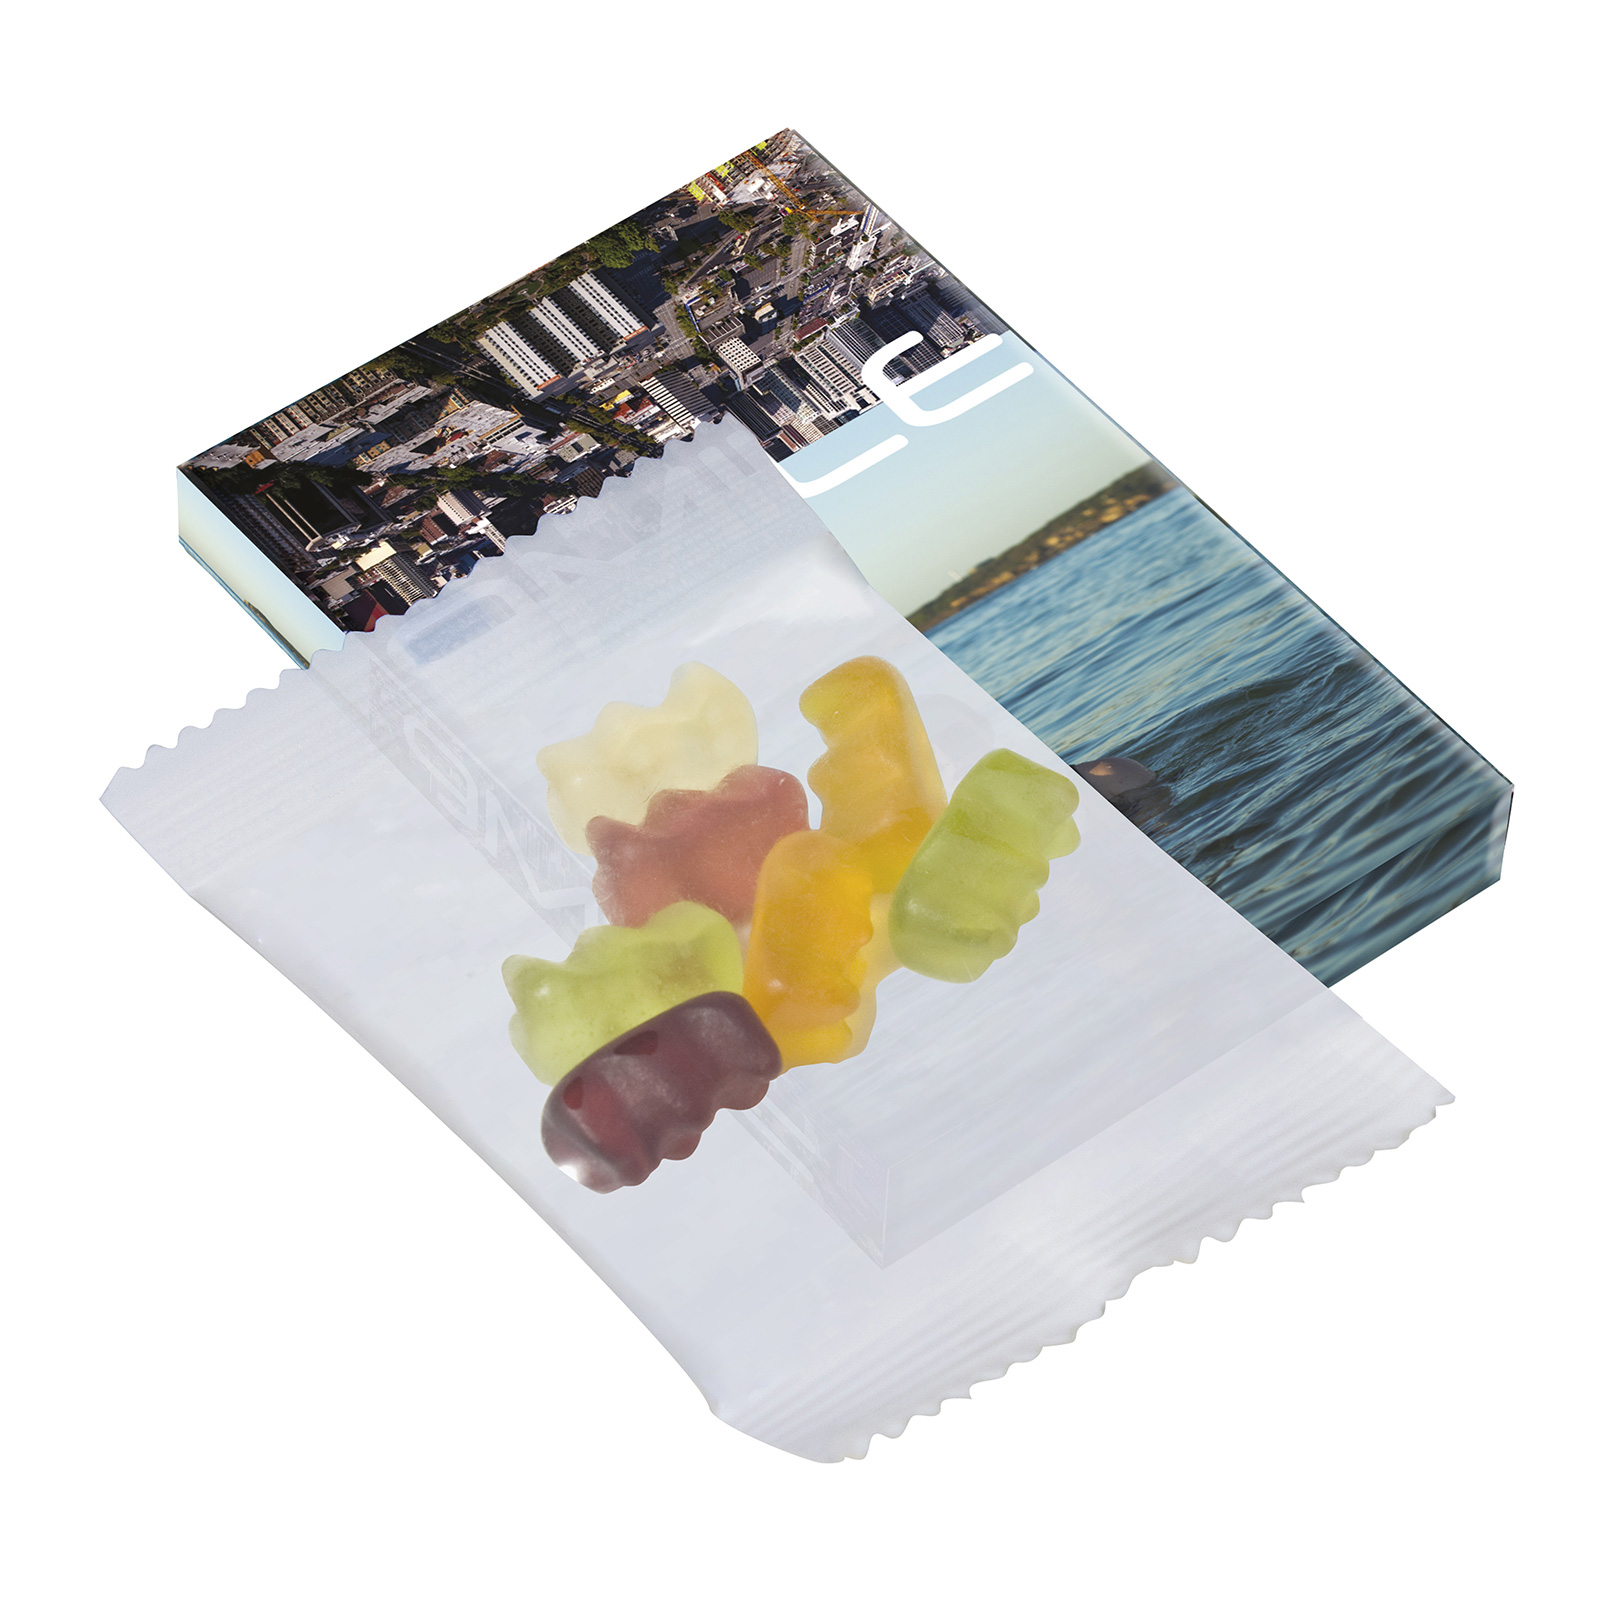 Fruit Jelly in a Printed Box with a Transparent Bag - Portree